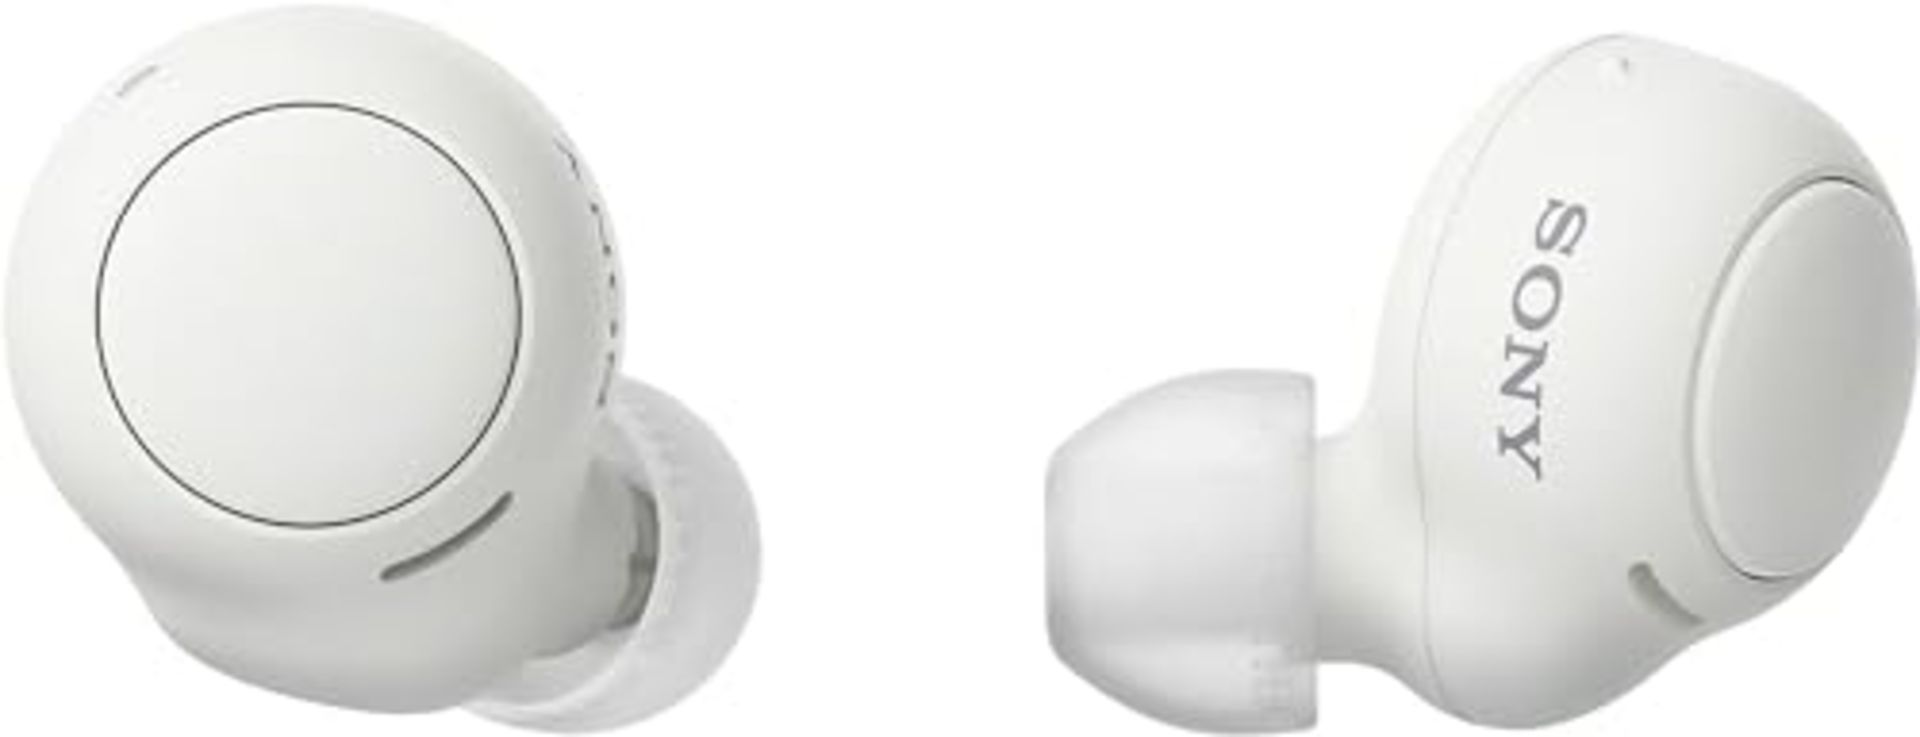 Sony WF-C500 wireless, Bluetooth, in-ear earbuds (with IPX4 rating and up to 20 hours